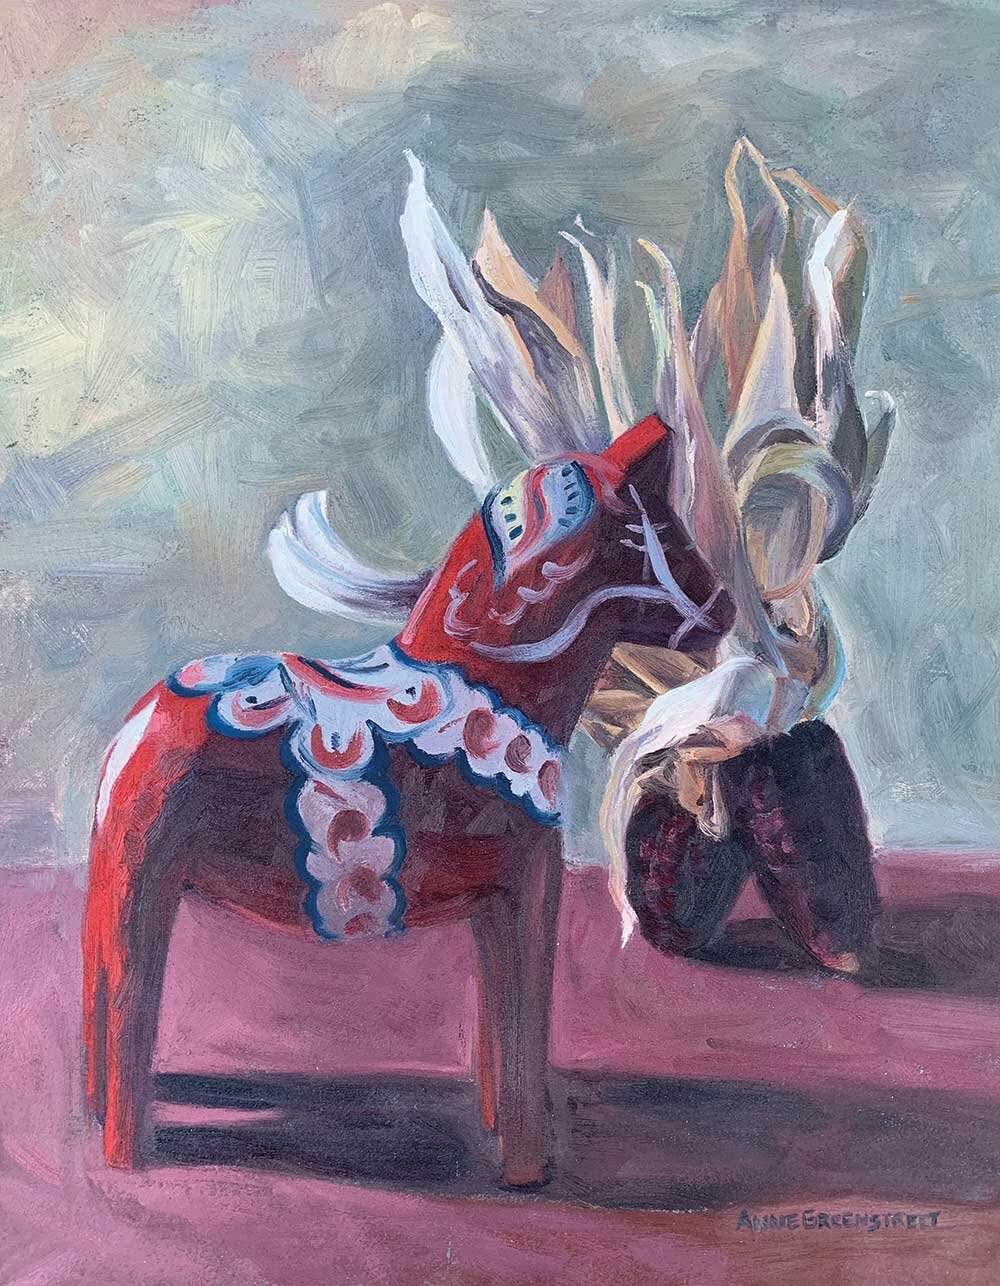 IVE-ALWAYS-WANTED-TO-PAINT-THIS-HORSE-2019.jpg